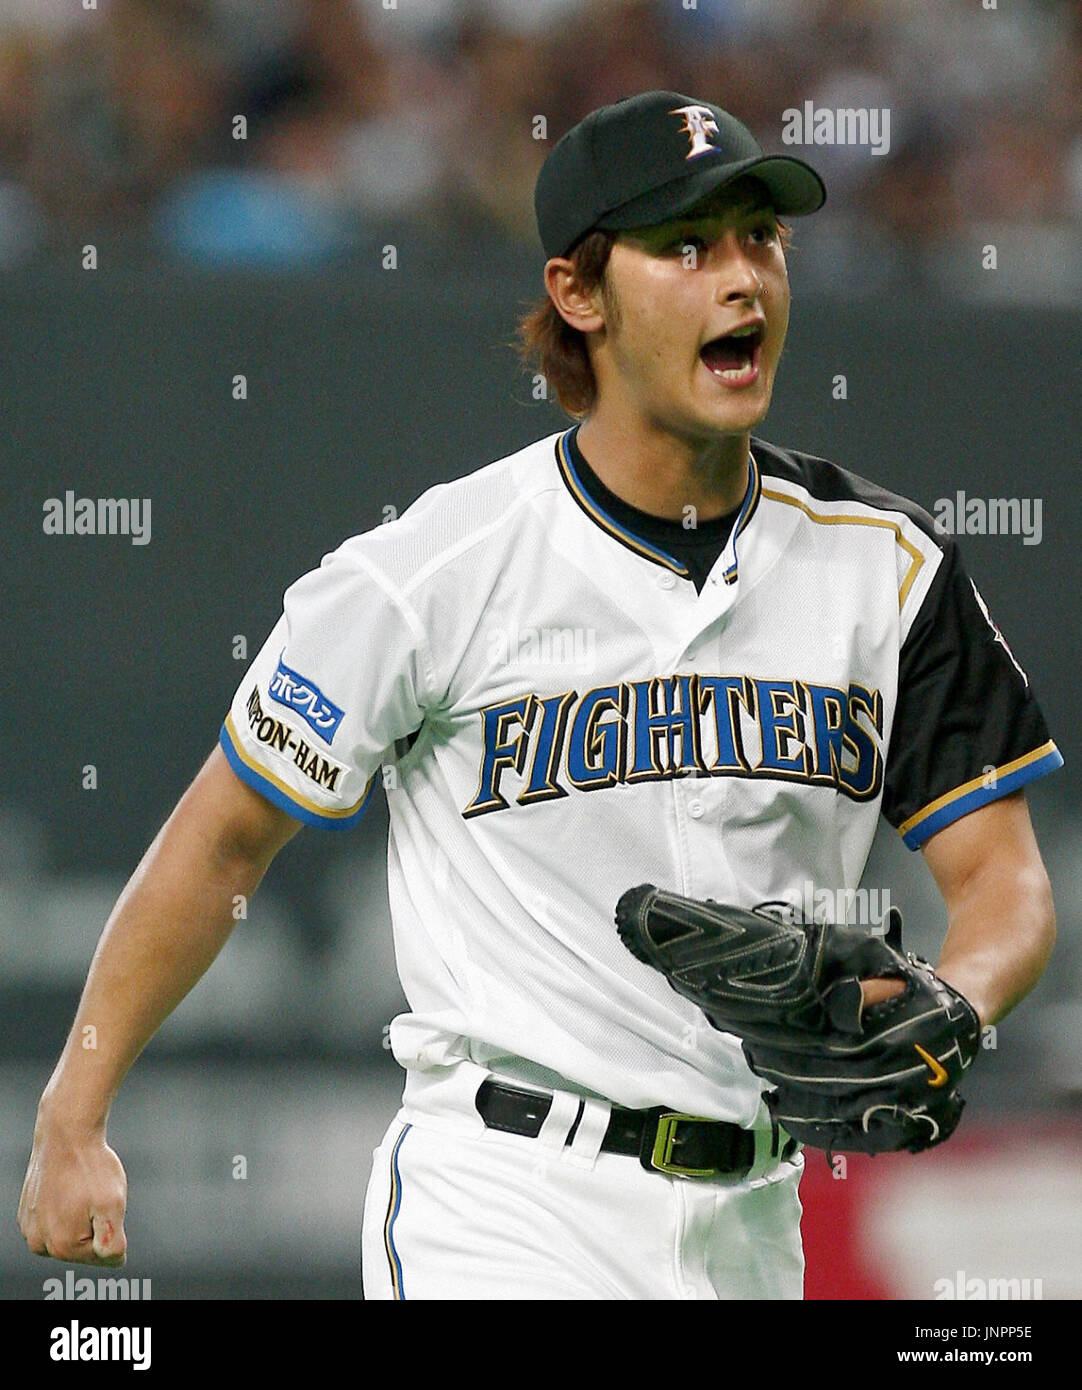 SAPPORO, Japan - Nippon Ham Fighters ace Yu Darvish reacts after striking  out Chunichi Dragons third baseman Masahiko Morino in the eighth inning of  their game in Sapporo Dome on June 13.